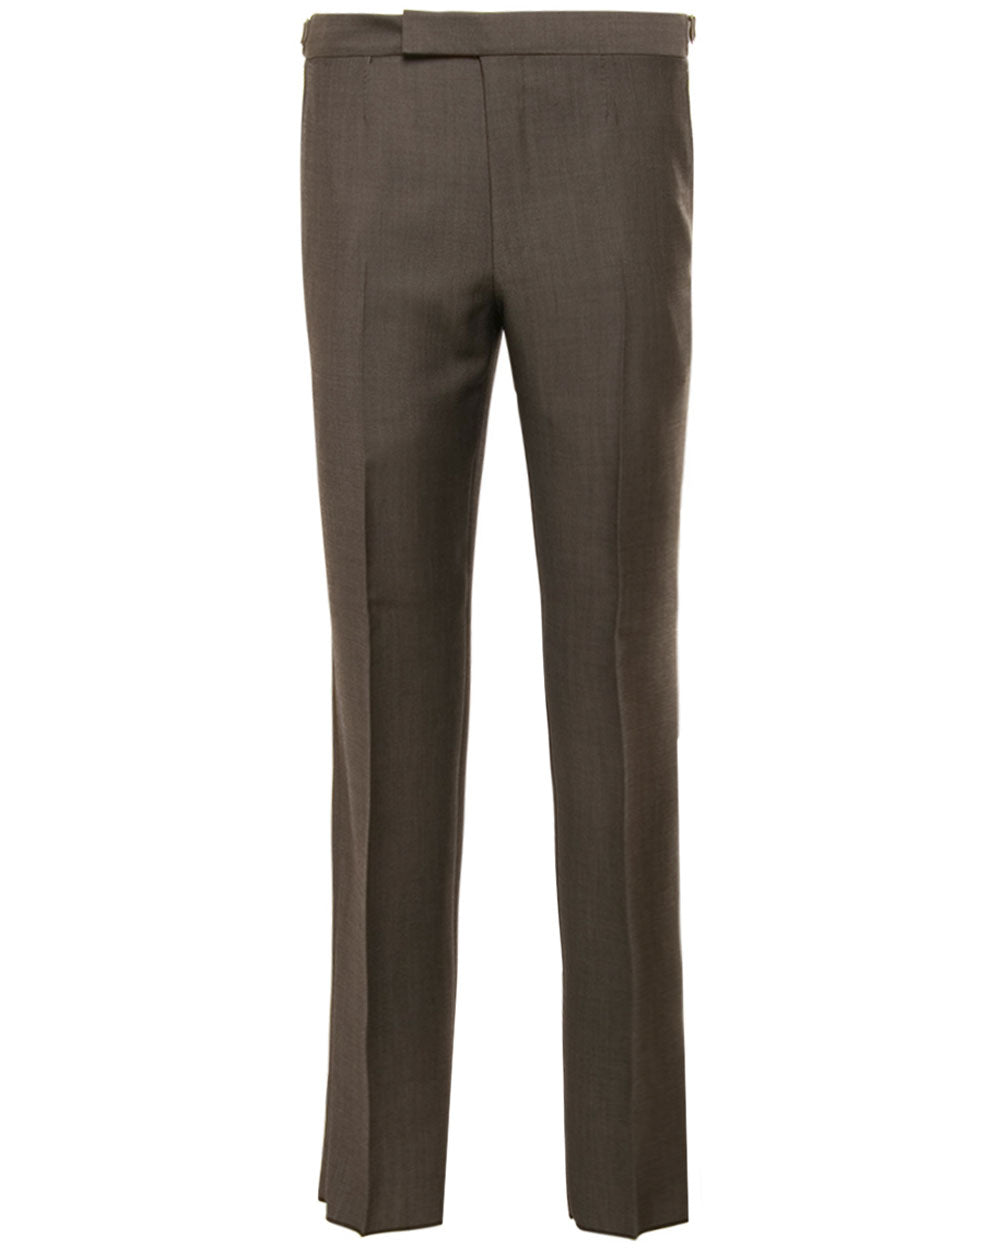 Anthracite City Trouser